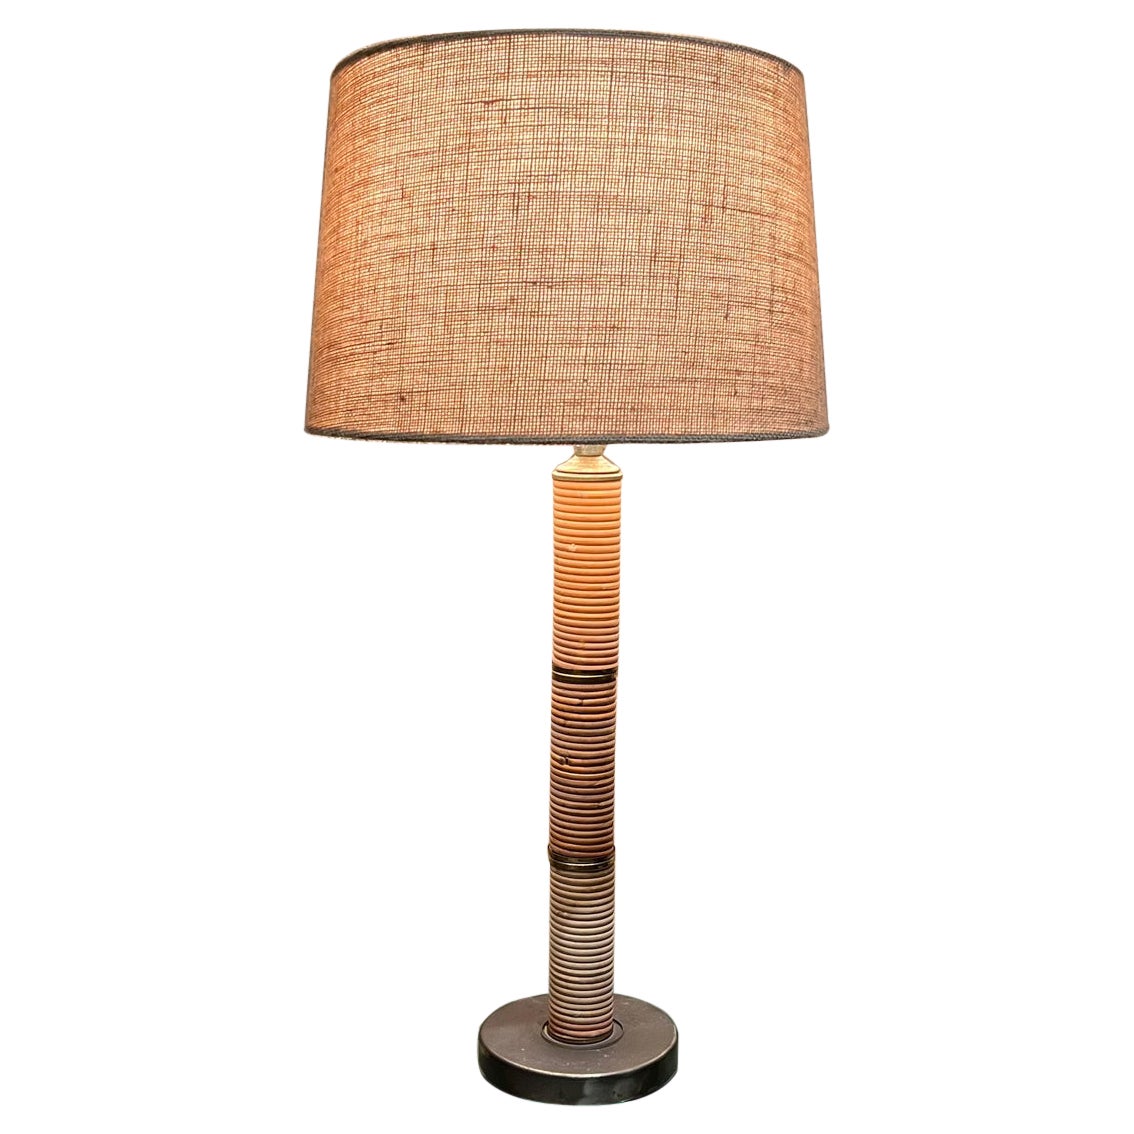 1960s Vintage Modern Wrapped Cane and Brass Plated Table Lamp For Sale